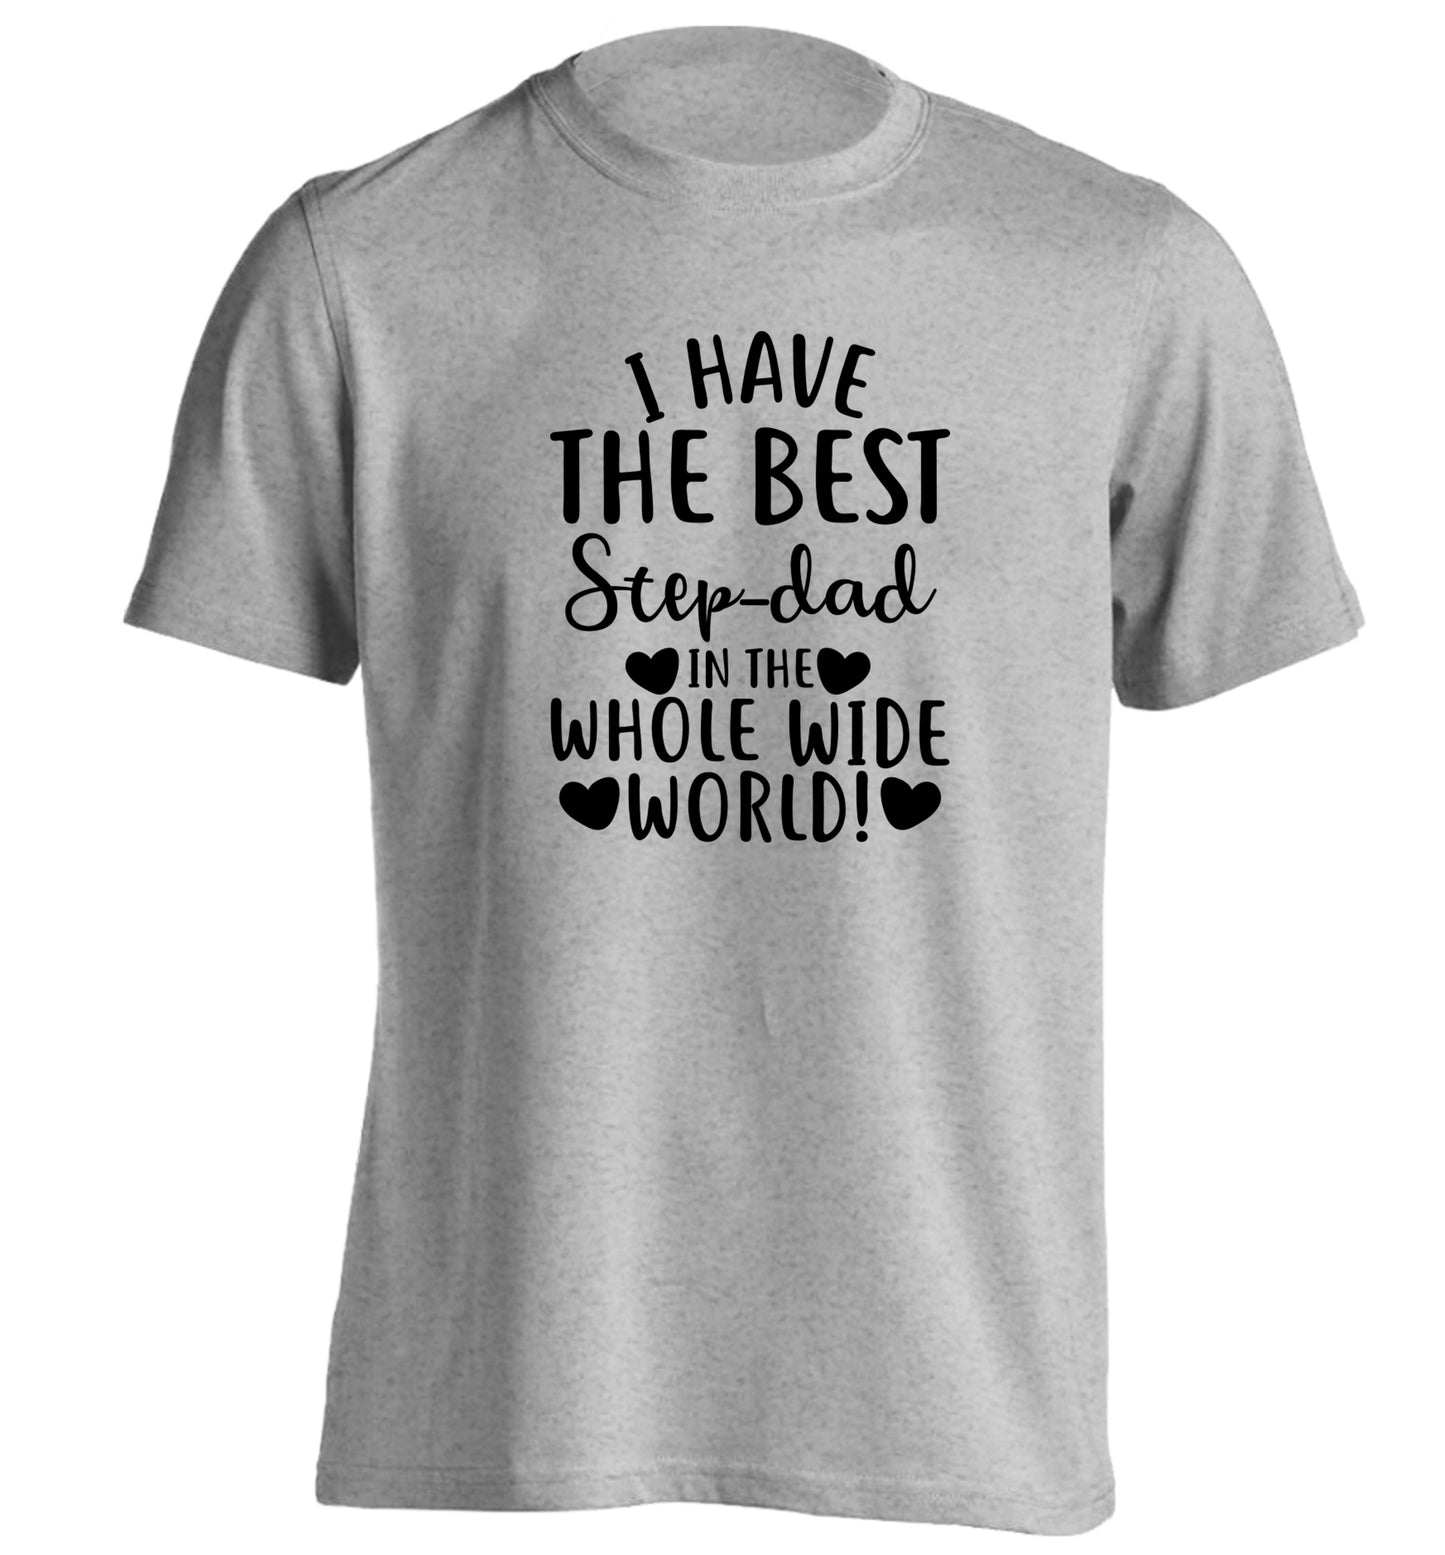 I have the best step-dad in the whole wide world! adults unisex grey Tshirt 2XL